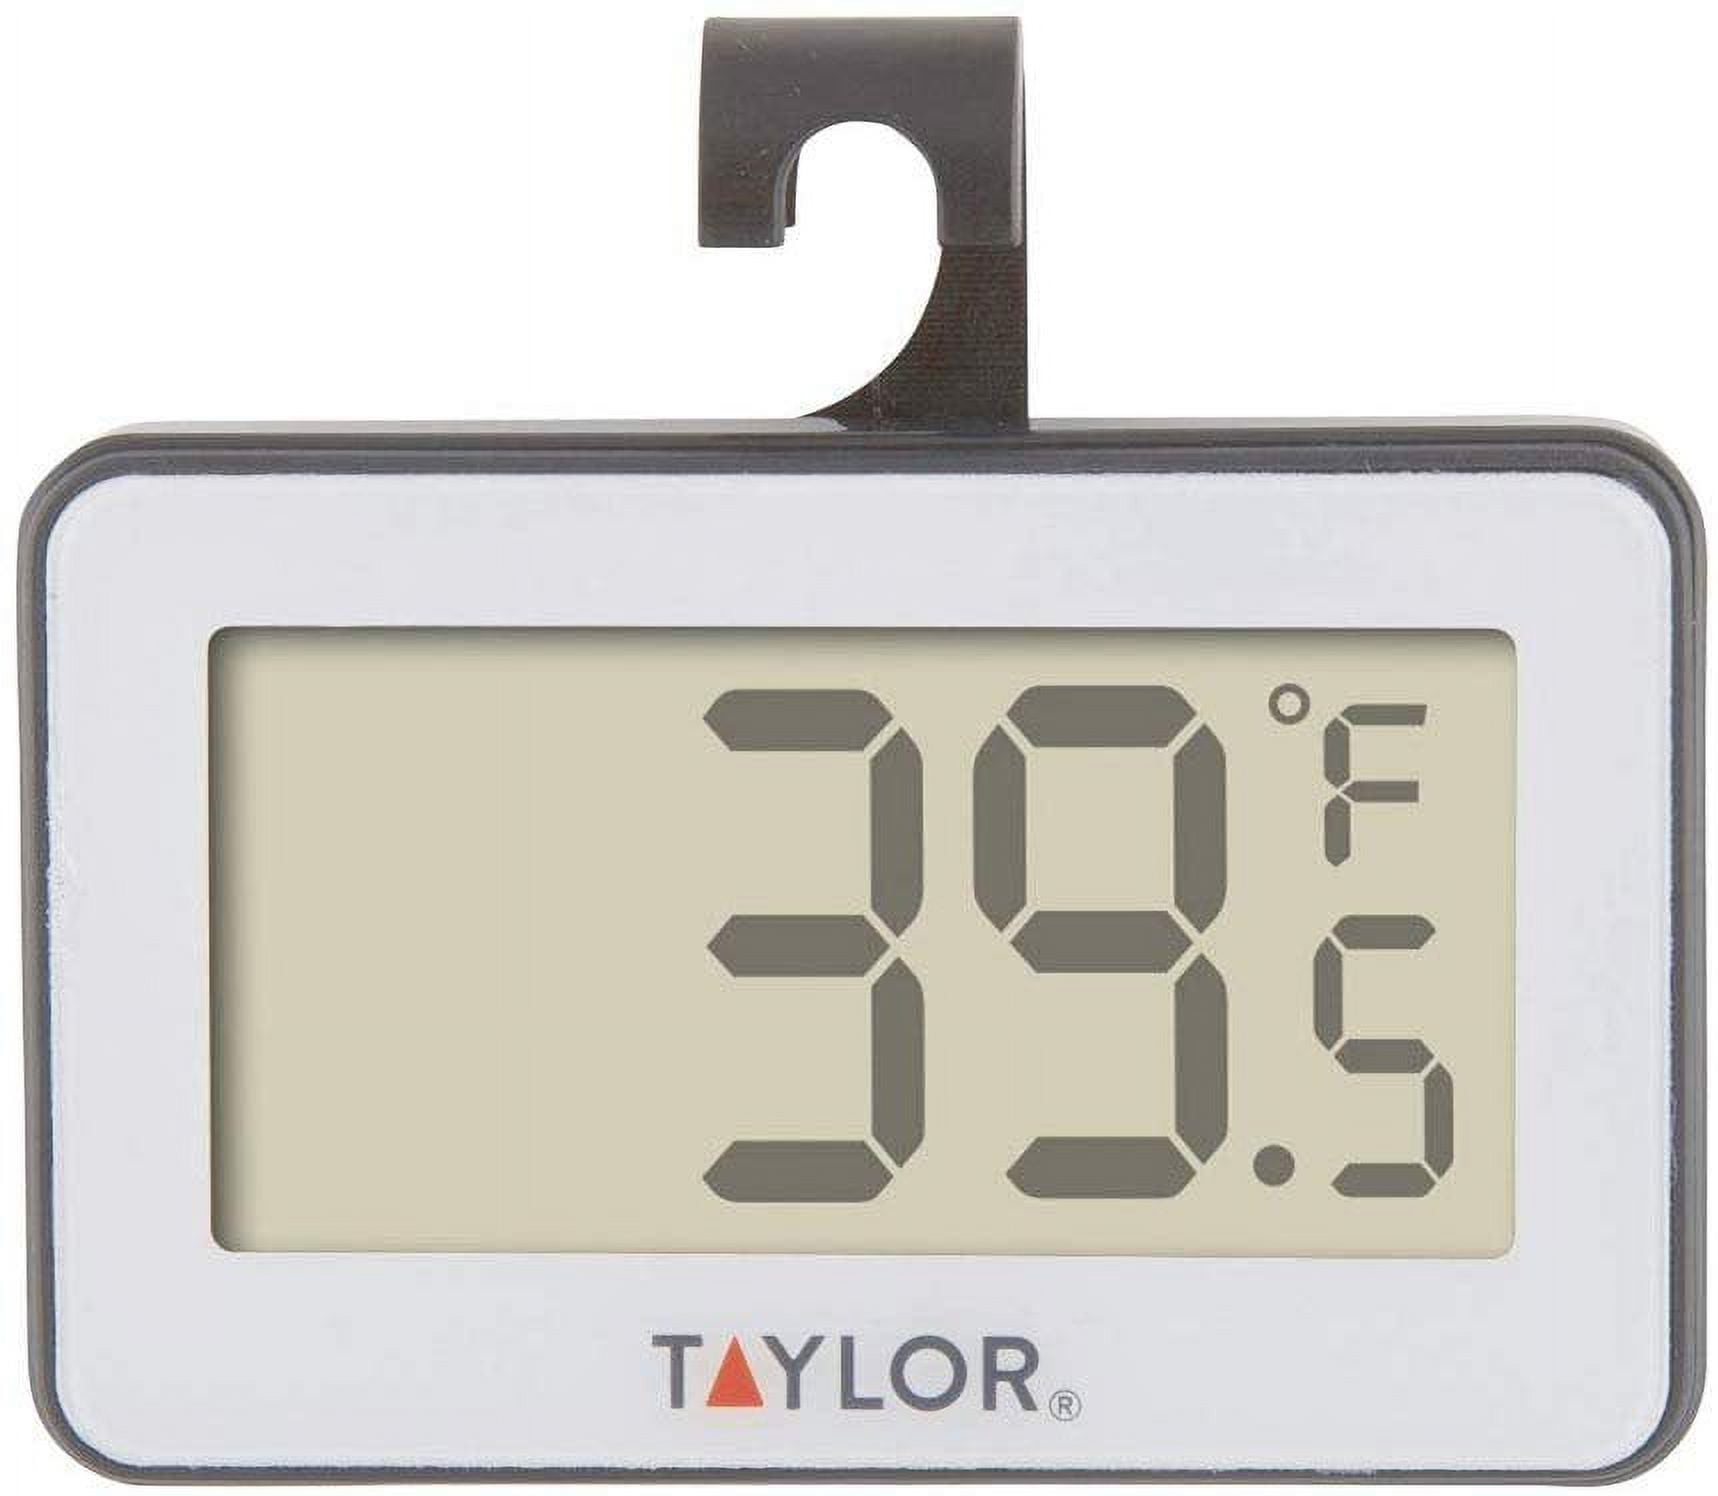 Taylor 1443 Digital RefrigeratorFreezer Thermometer Large Display  Adjustable Temperature For Home Commercial - Office Depot